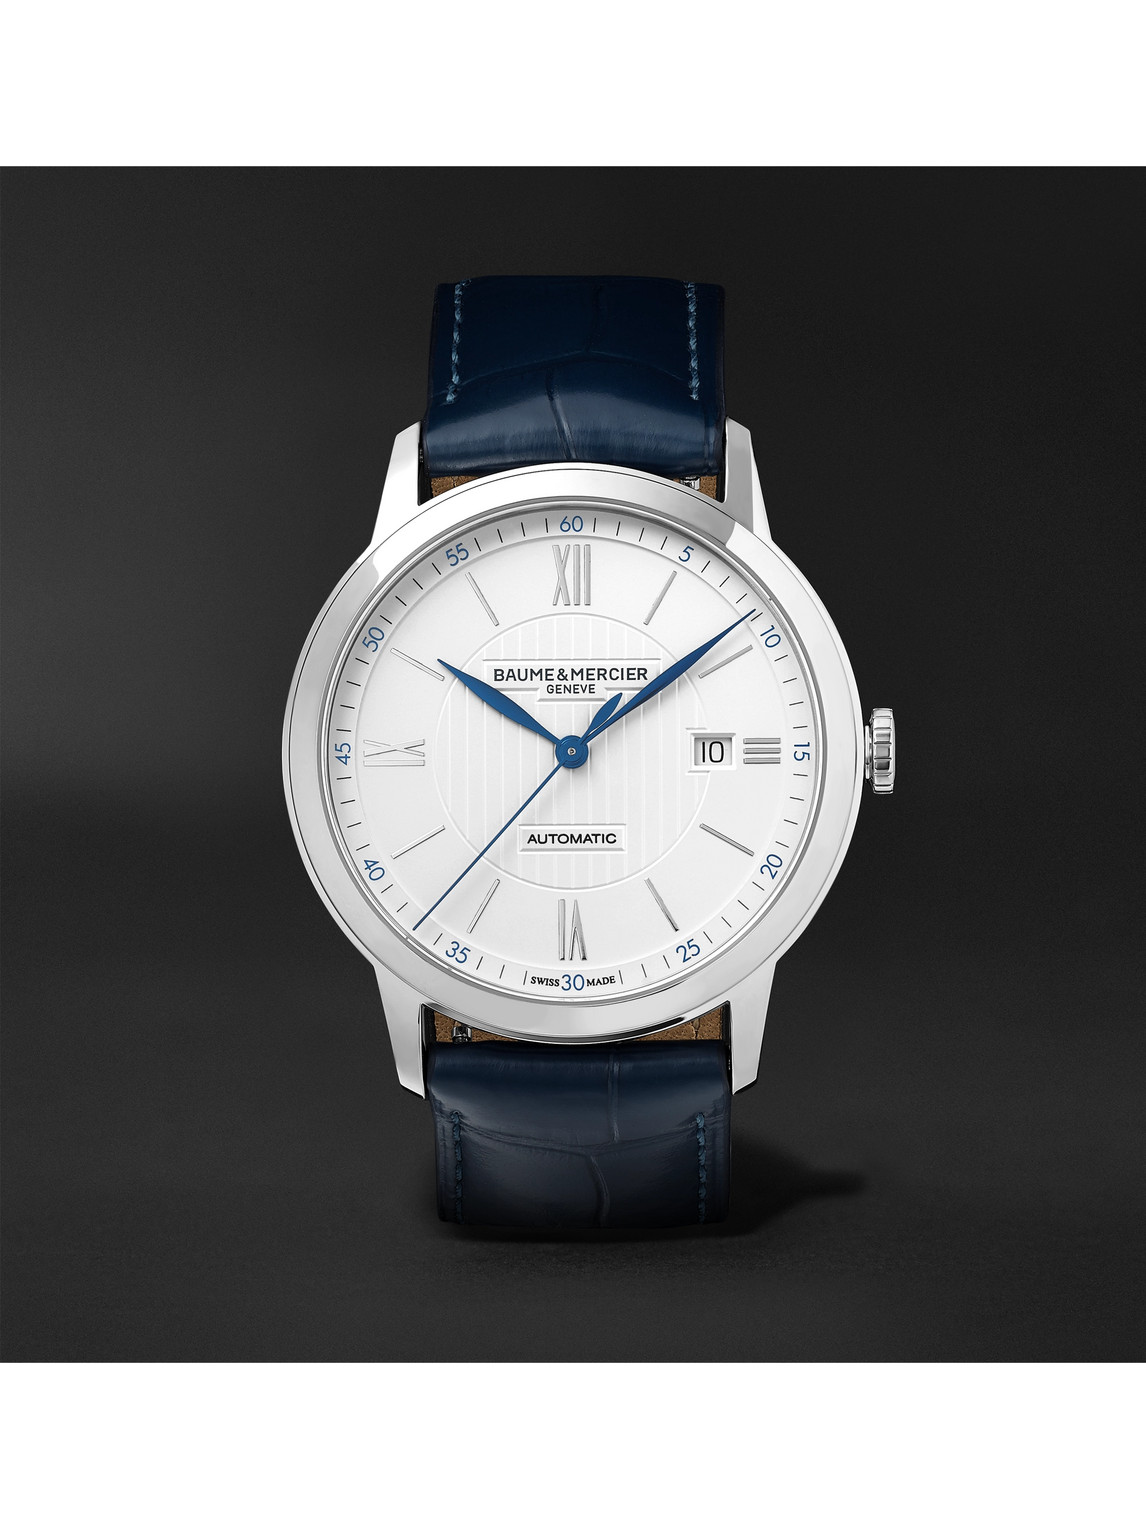 Baume & Mercier Classima Automatic 42mm Stainless Steel And Alligator Watch, Ref. No. 10333 In Silver